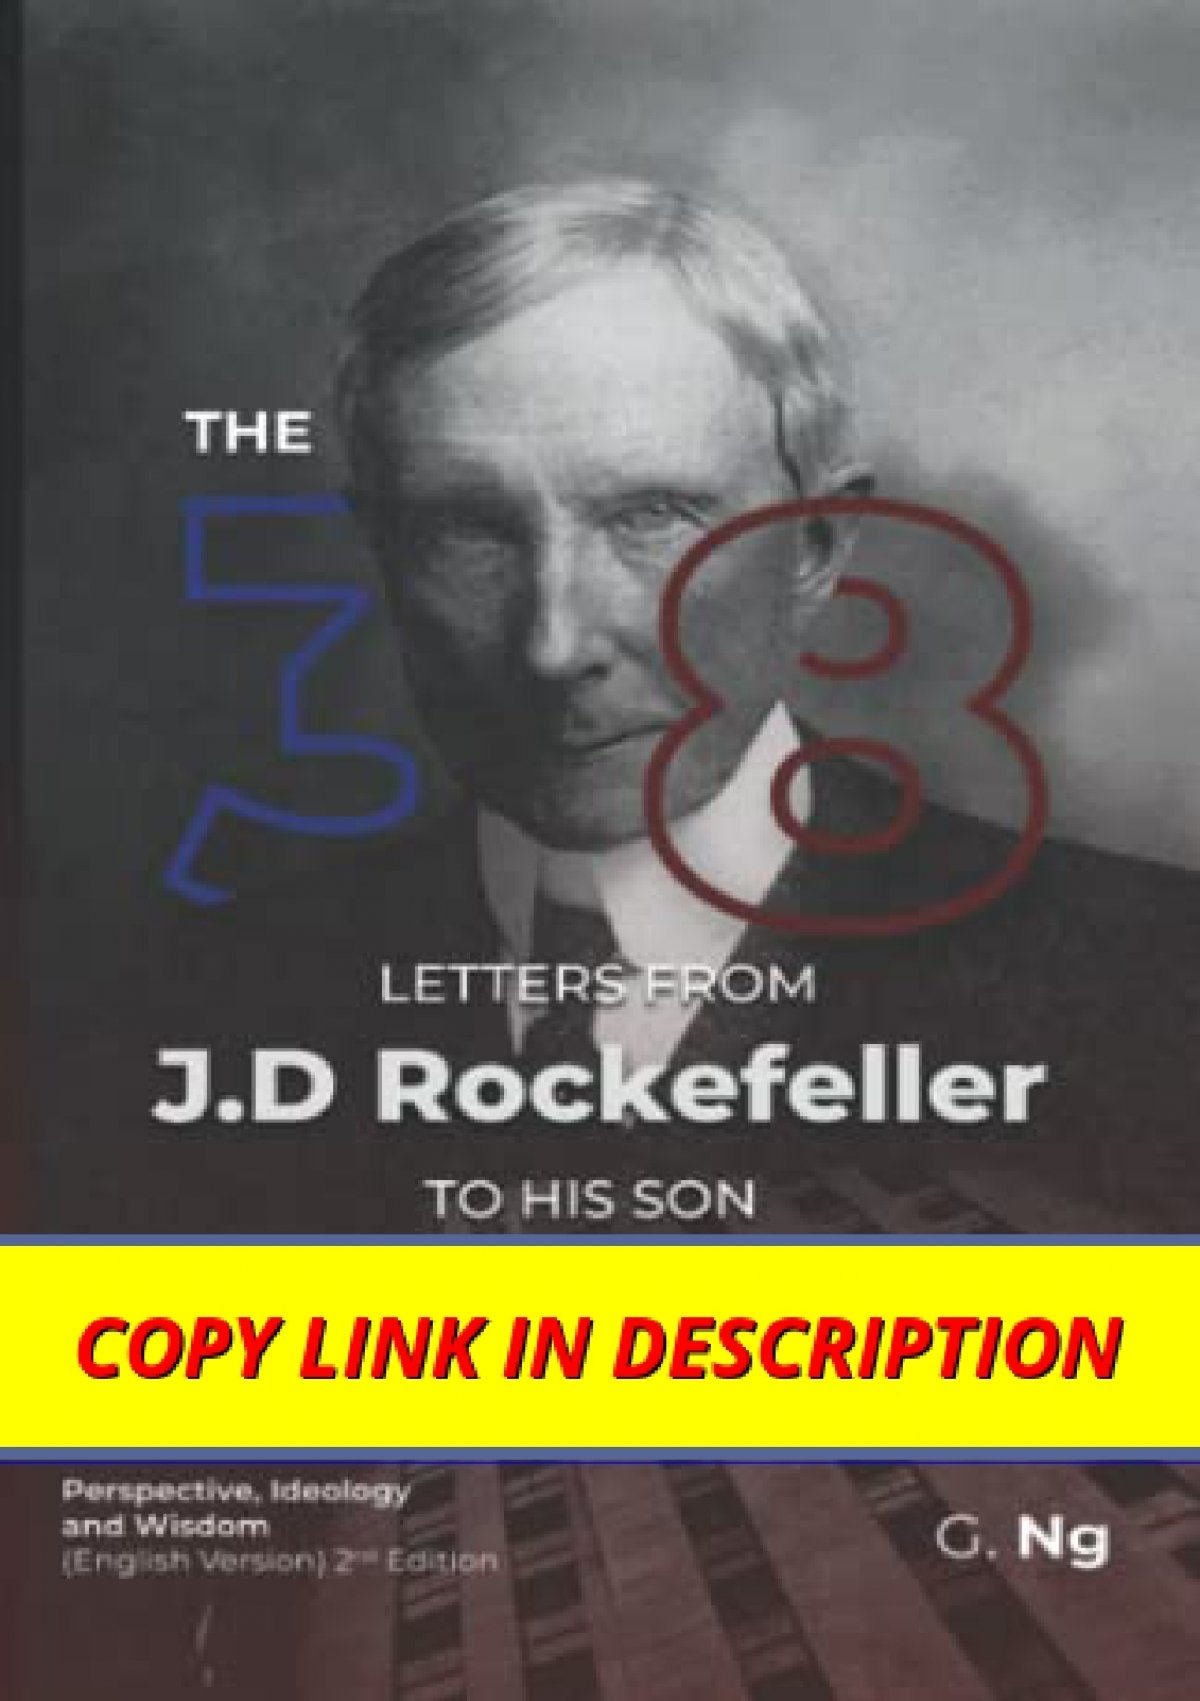 The 38 Letters from J.D. Rockefeller to his son: Perspectives, Ideology,  and Wisdom (English Version) Paperback 2nd Edition: Ng, G., Tan, M.:  9798450550015: : Books